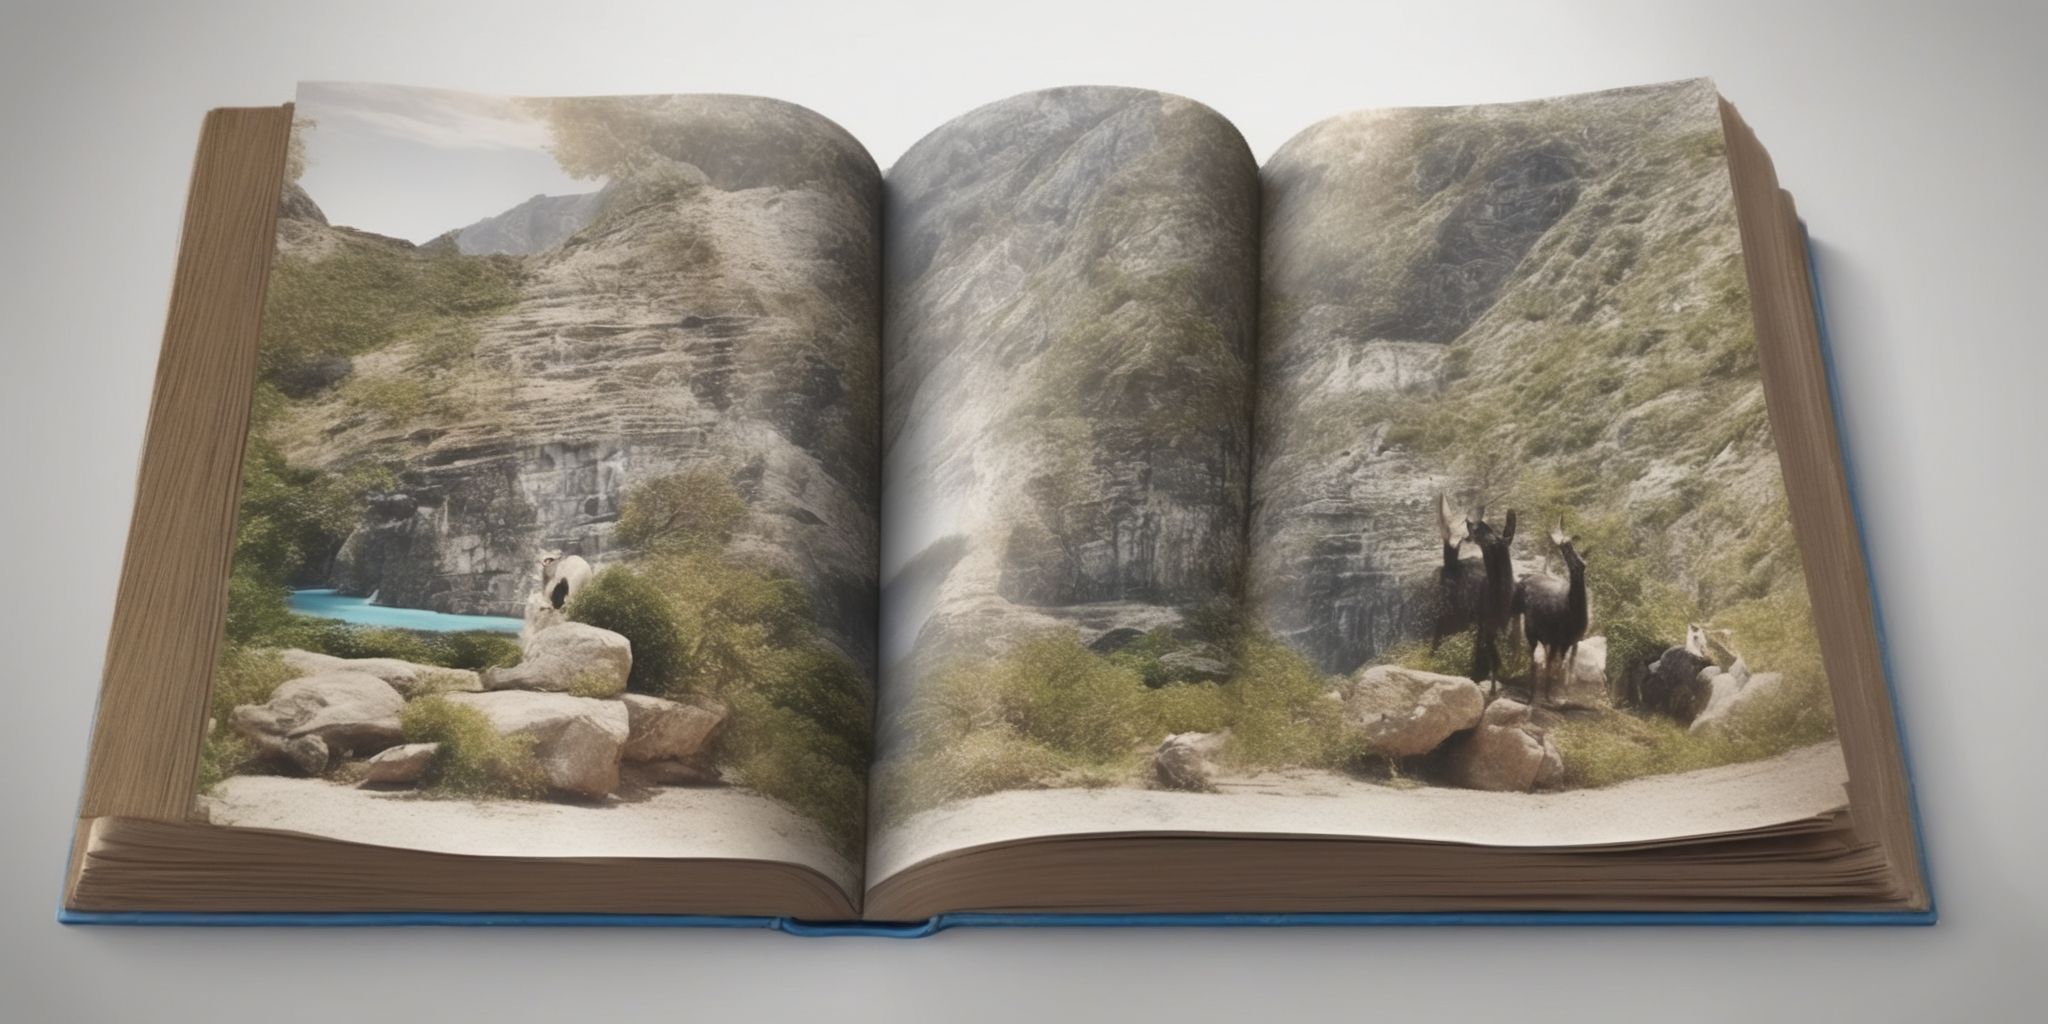 Guidebook  in realistic, photographic style